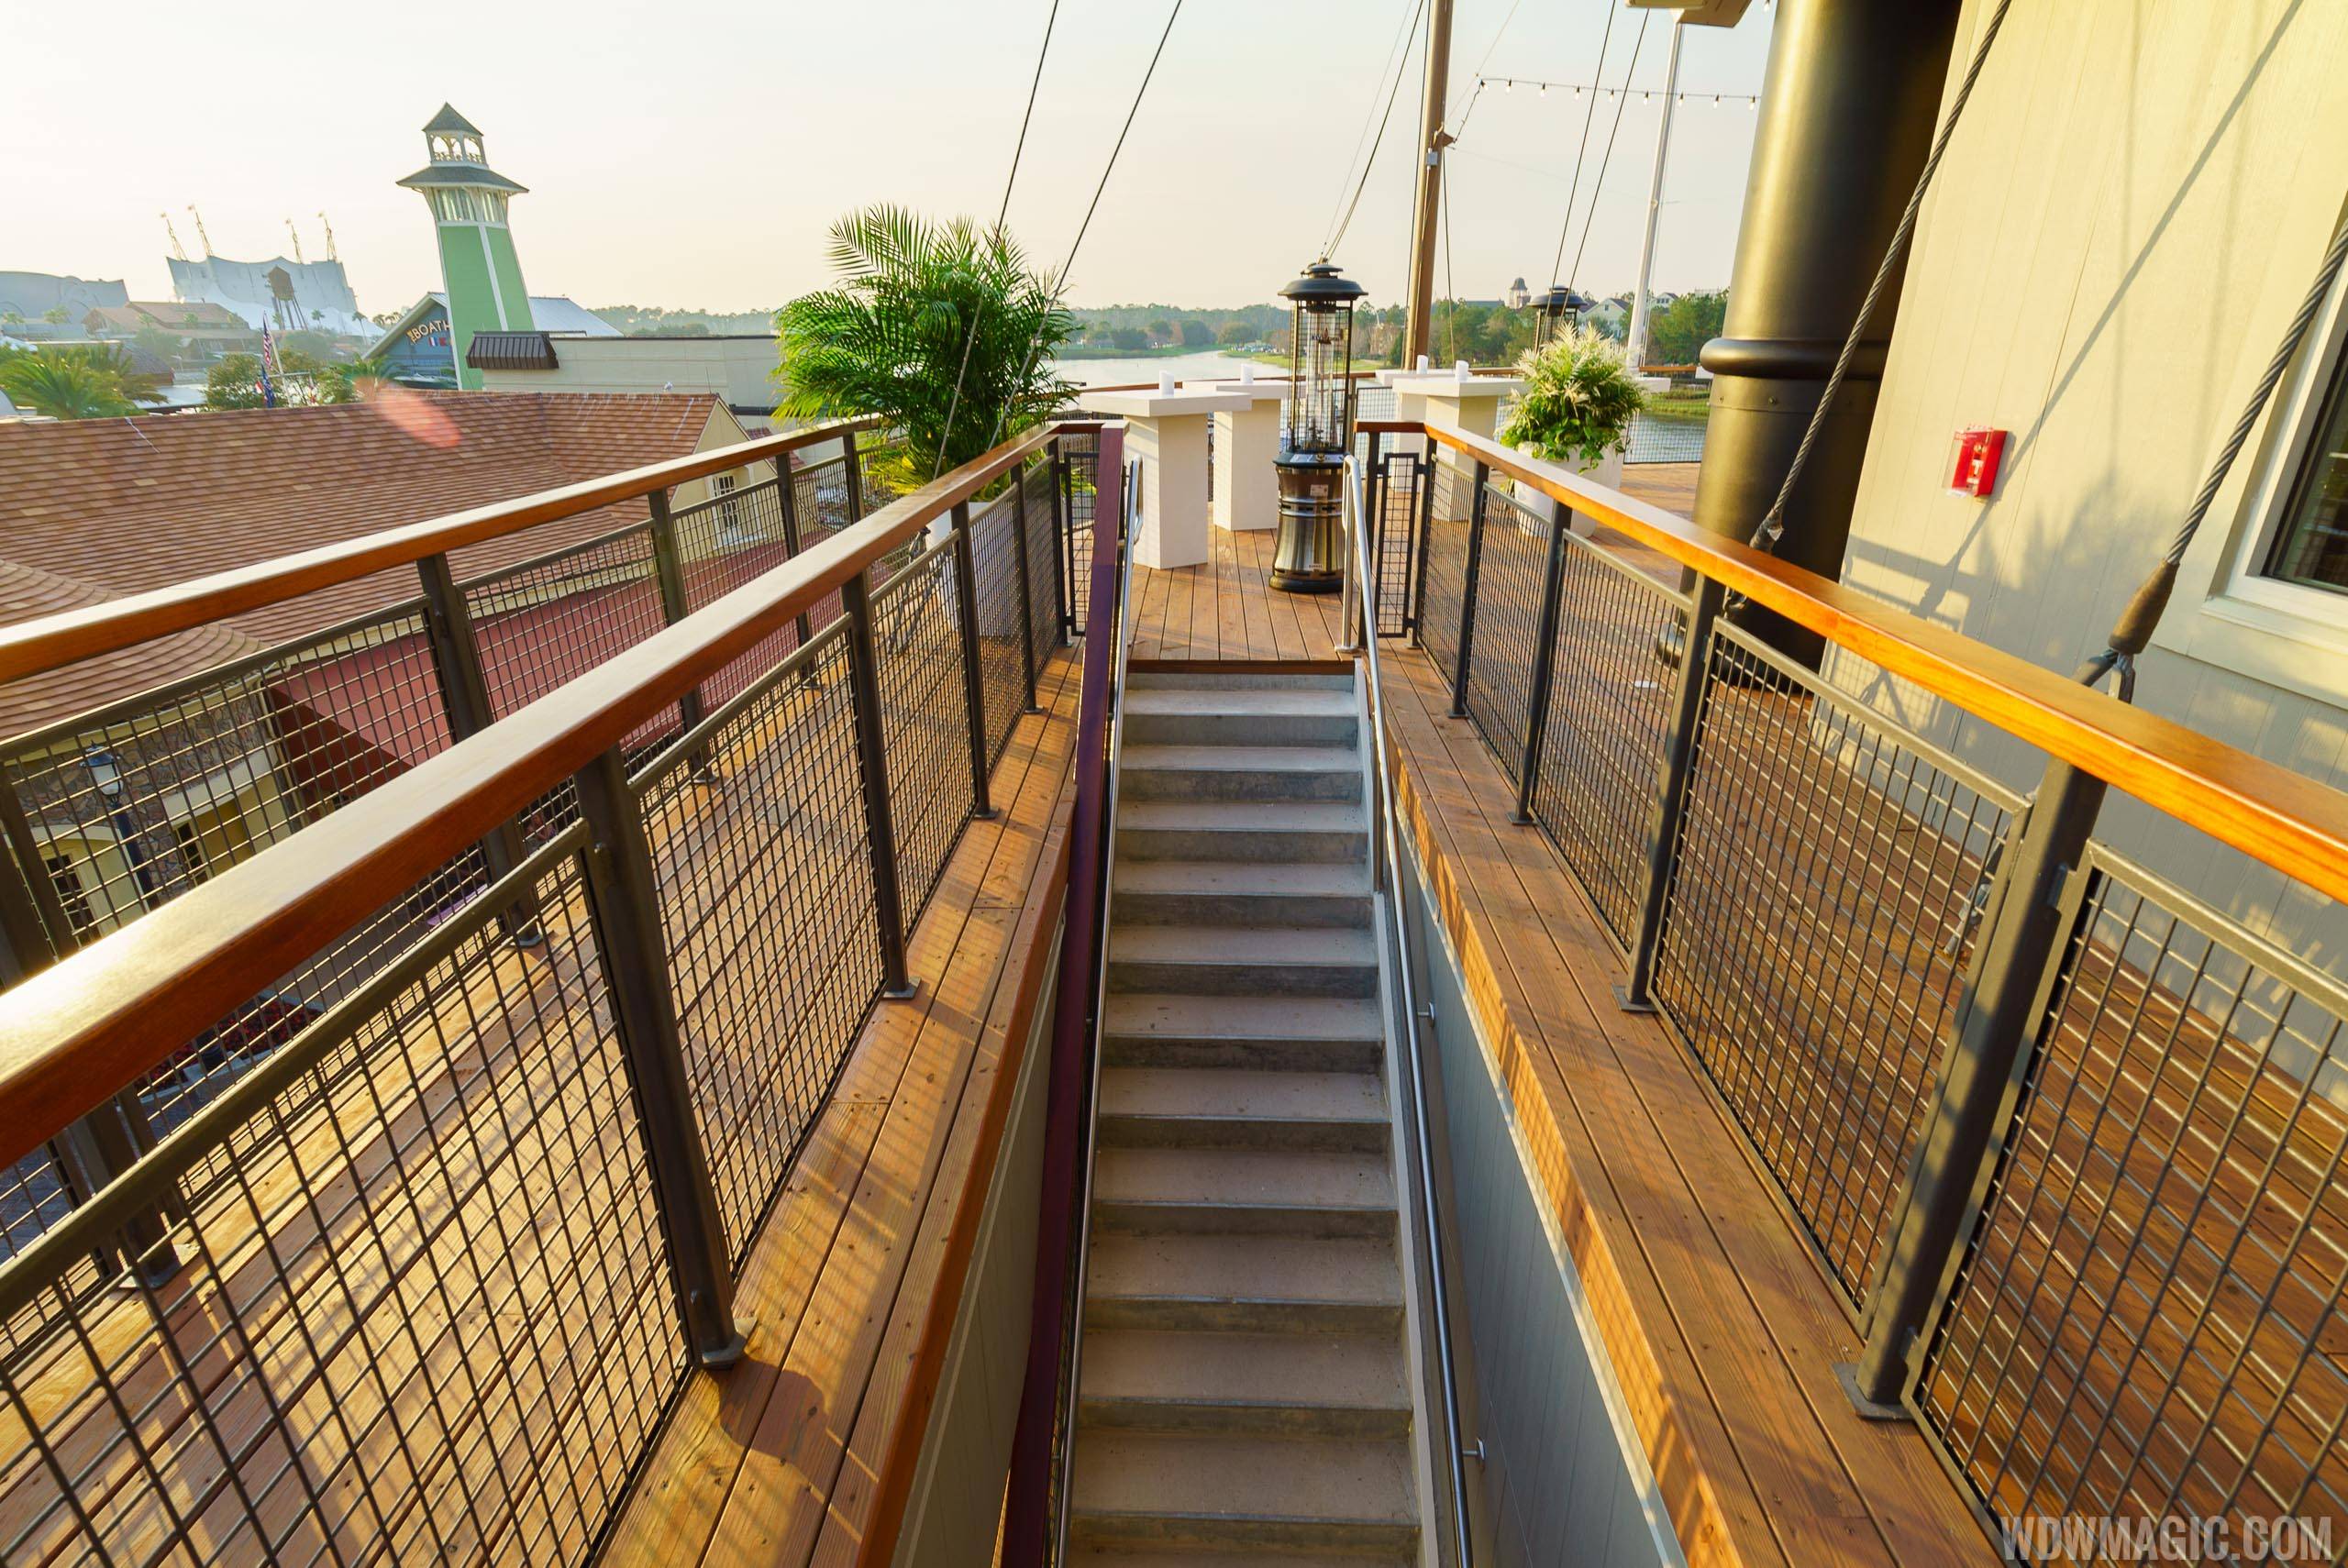 Paddlefish - Stairway from the top deck